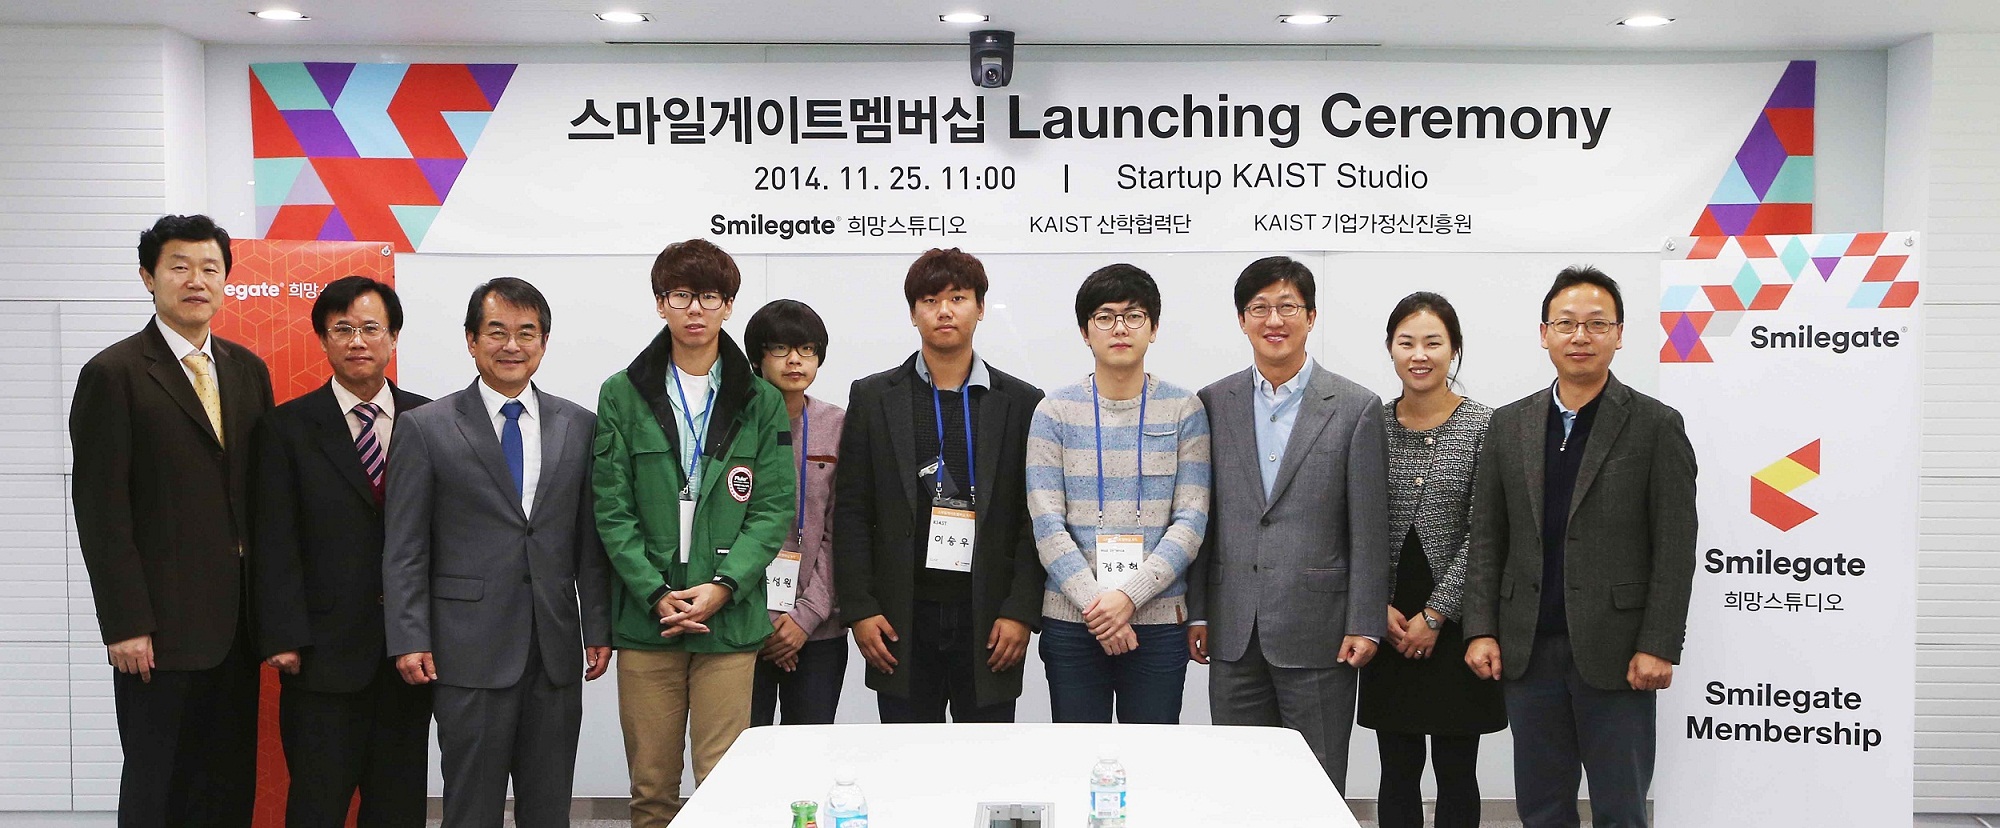 SmileGate Membership Program for Students and Video Game Industry in Korea 이미지